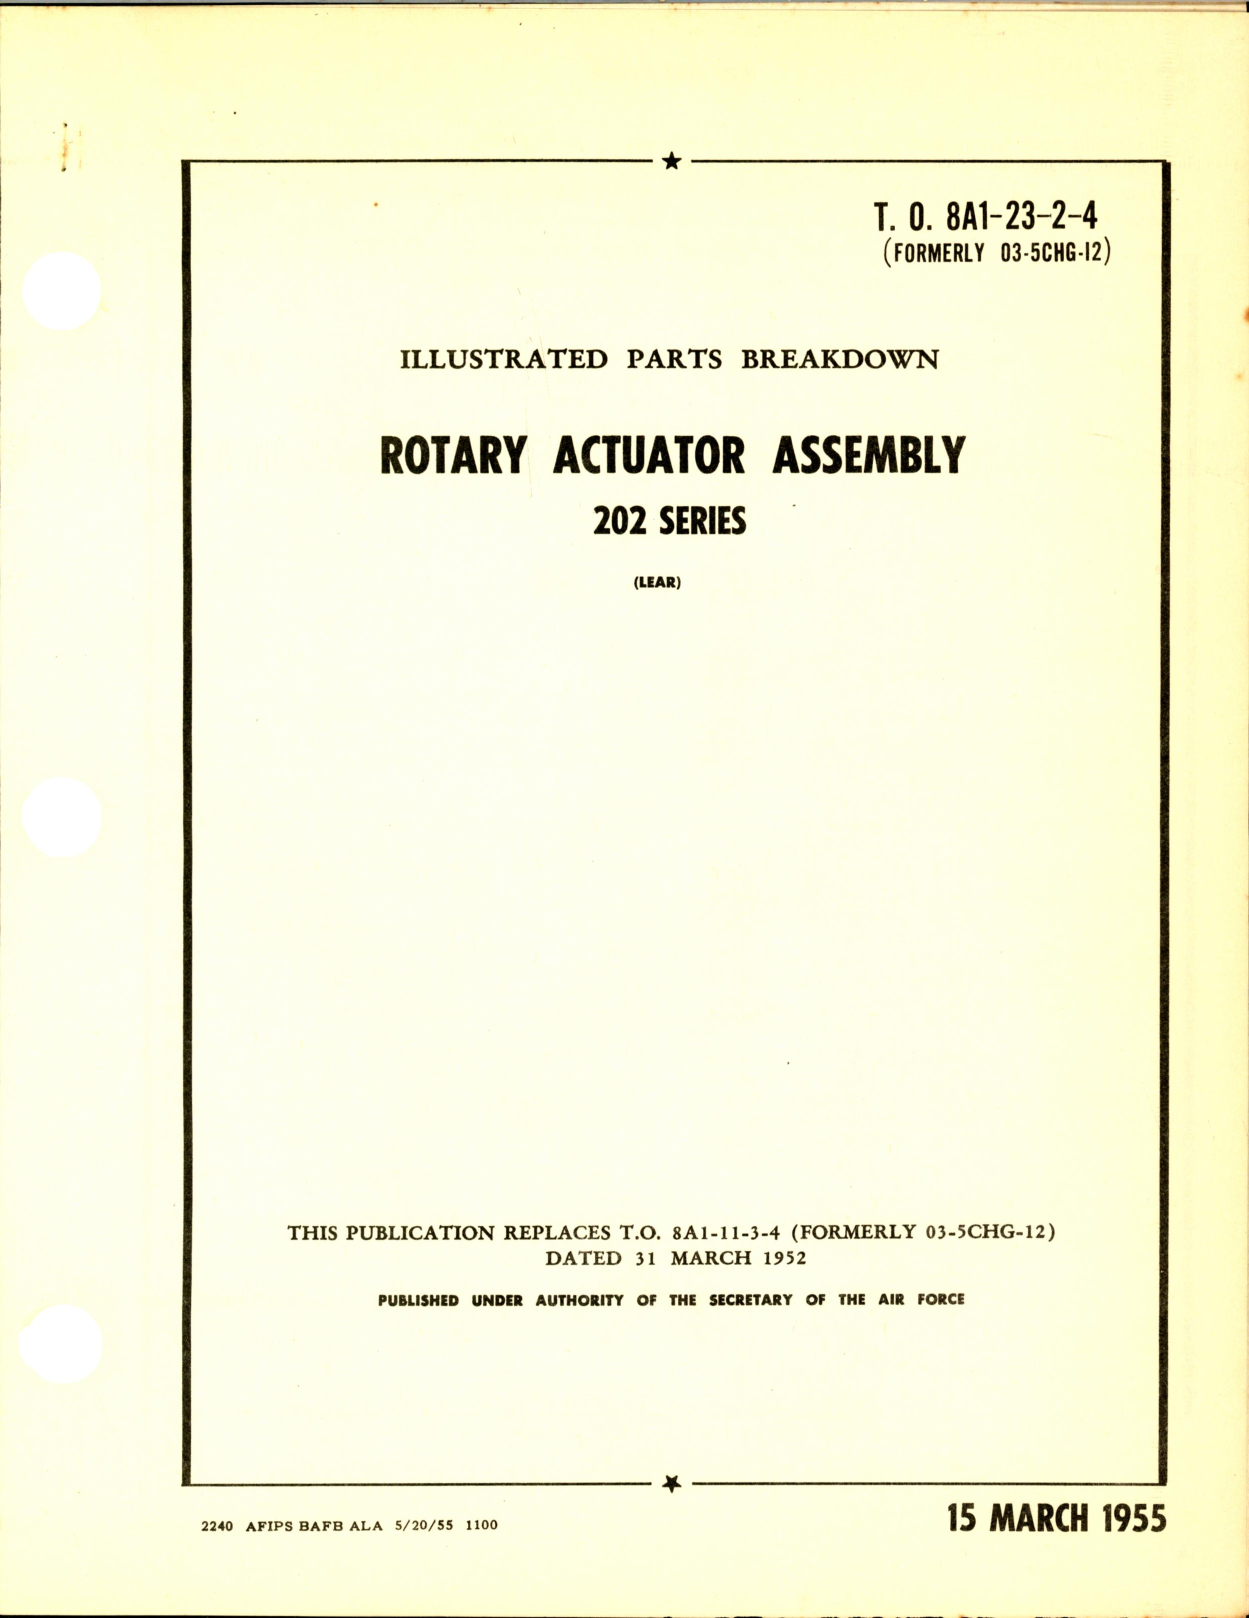 Sample page 1 from AirCorps Library document: Illustrated Parts Breakdown Rotary Actuator Assembly 202 Series